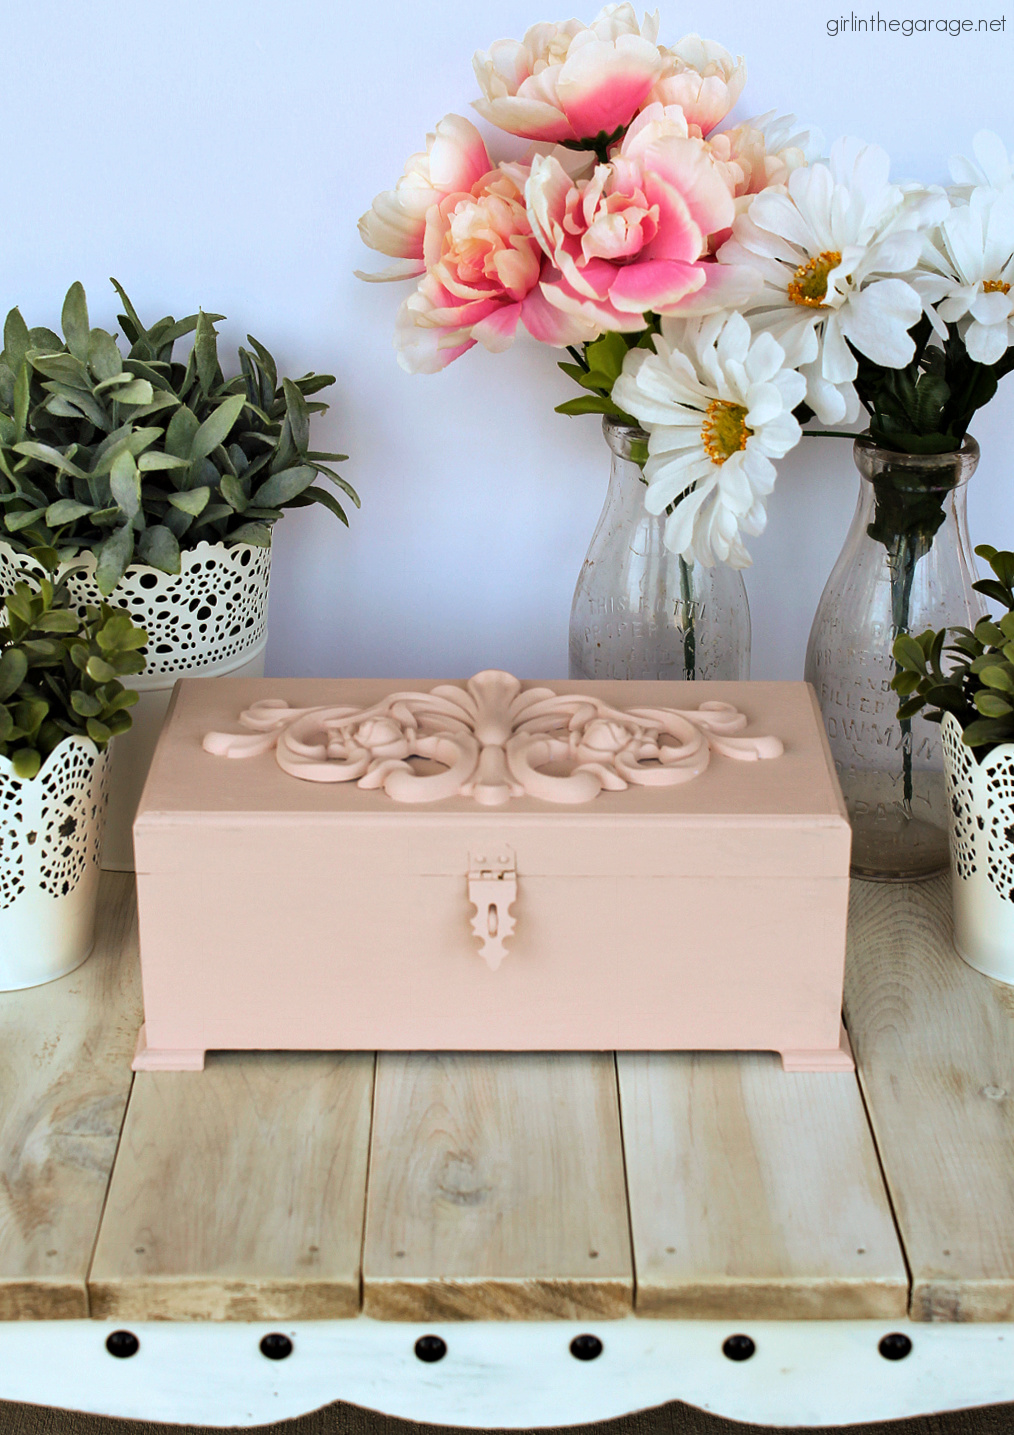 How to upcycle a jewelry box with Country Chic Paint in Ooh La La (light pink) - by Girl in the Garage